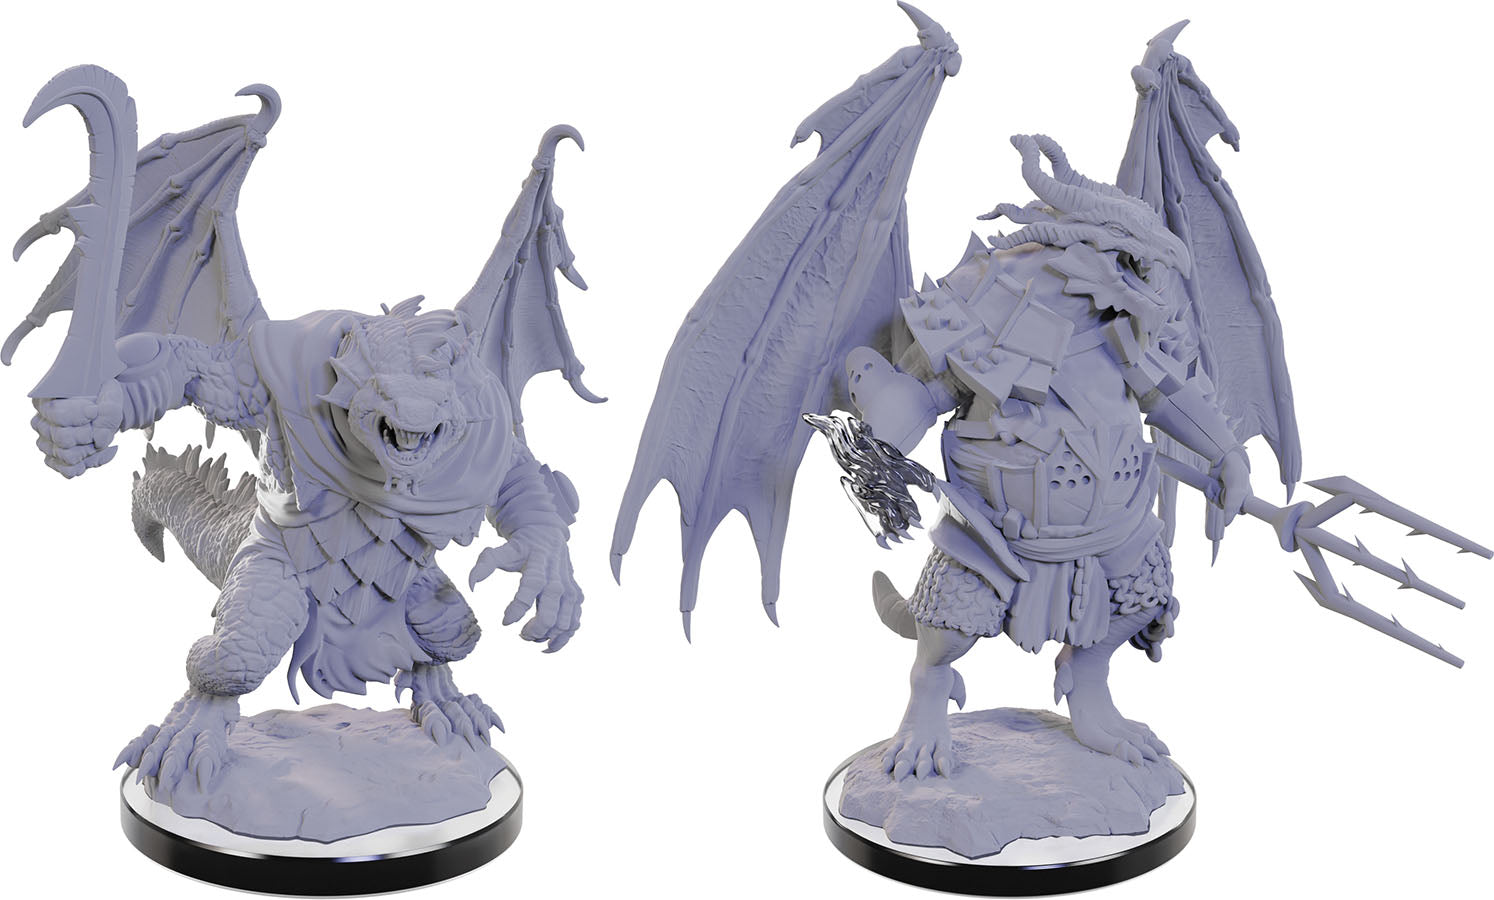 W22 Draconian Mage & Foot Soldier - Dungeons & Dragons: Nolzur's Marvelous Unpainted Miniatures - Bards & Cards